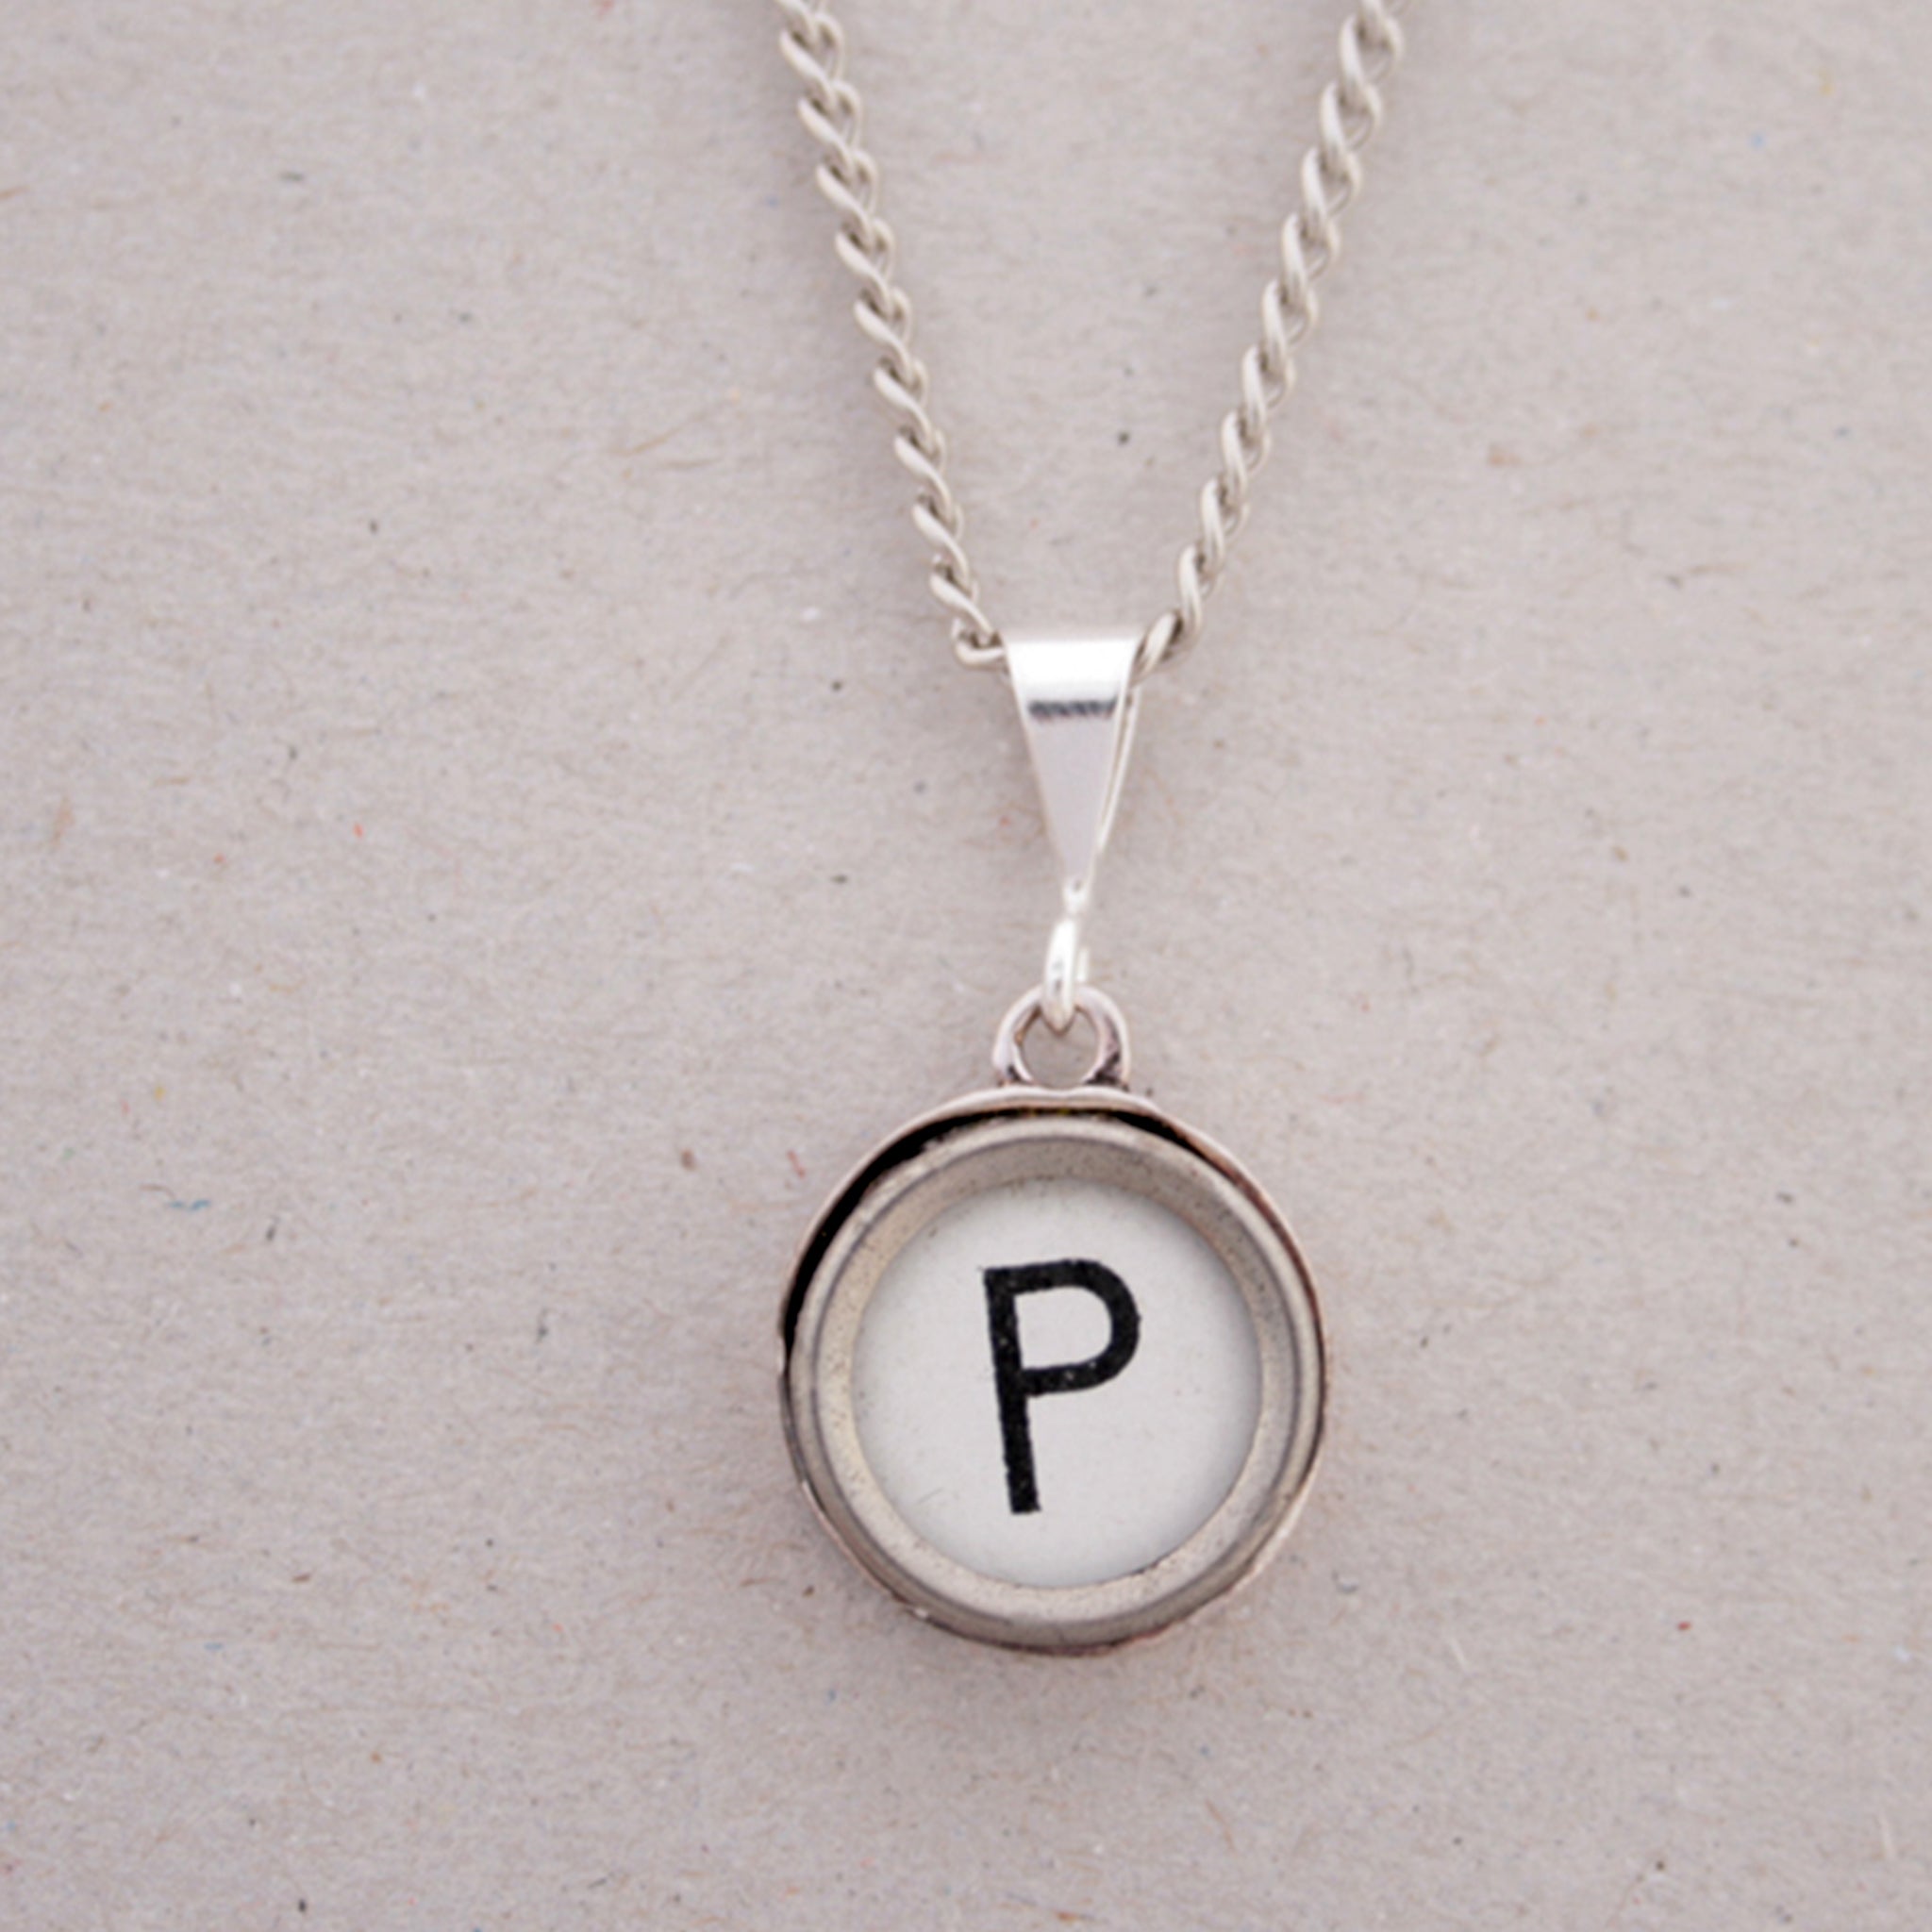 White P letter initial necklace made of antique typewriter key